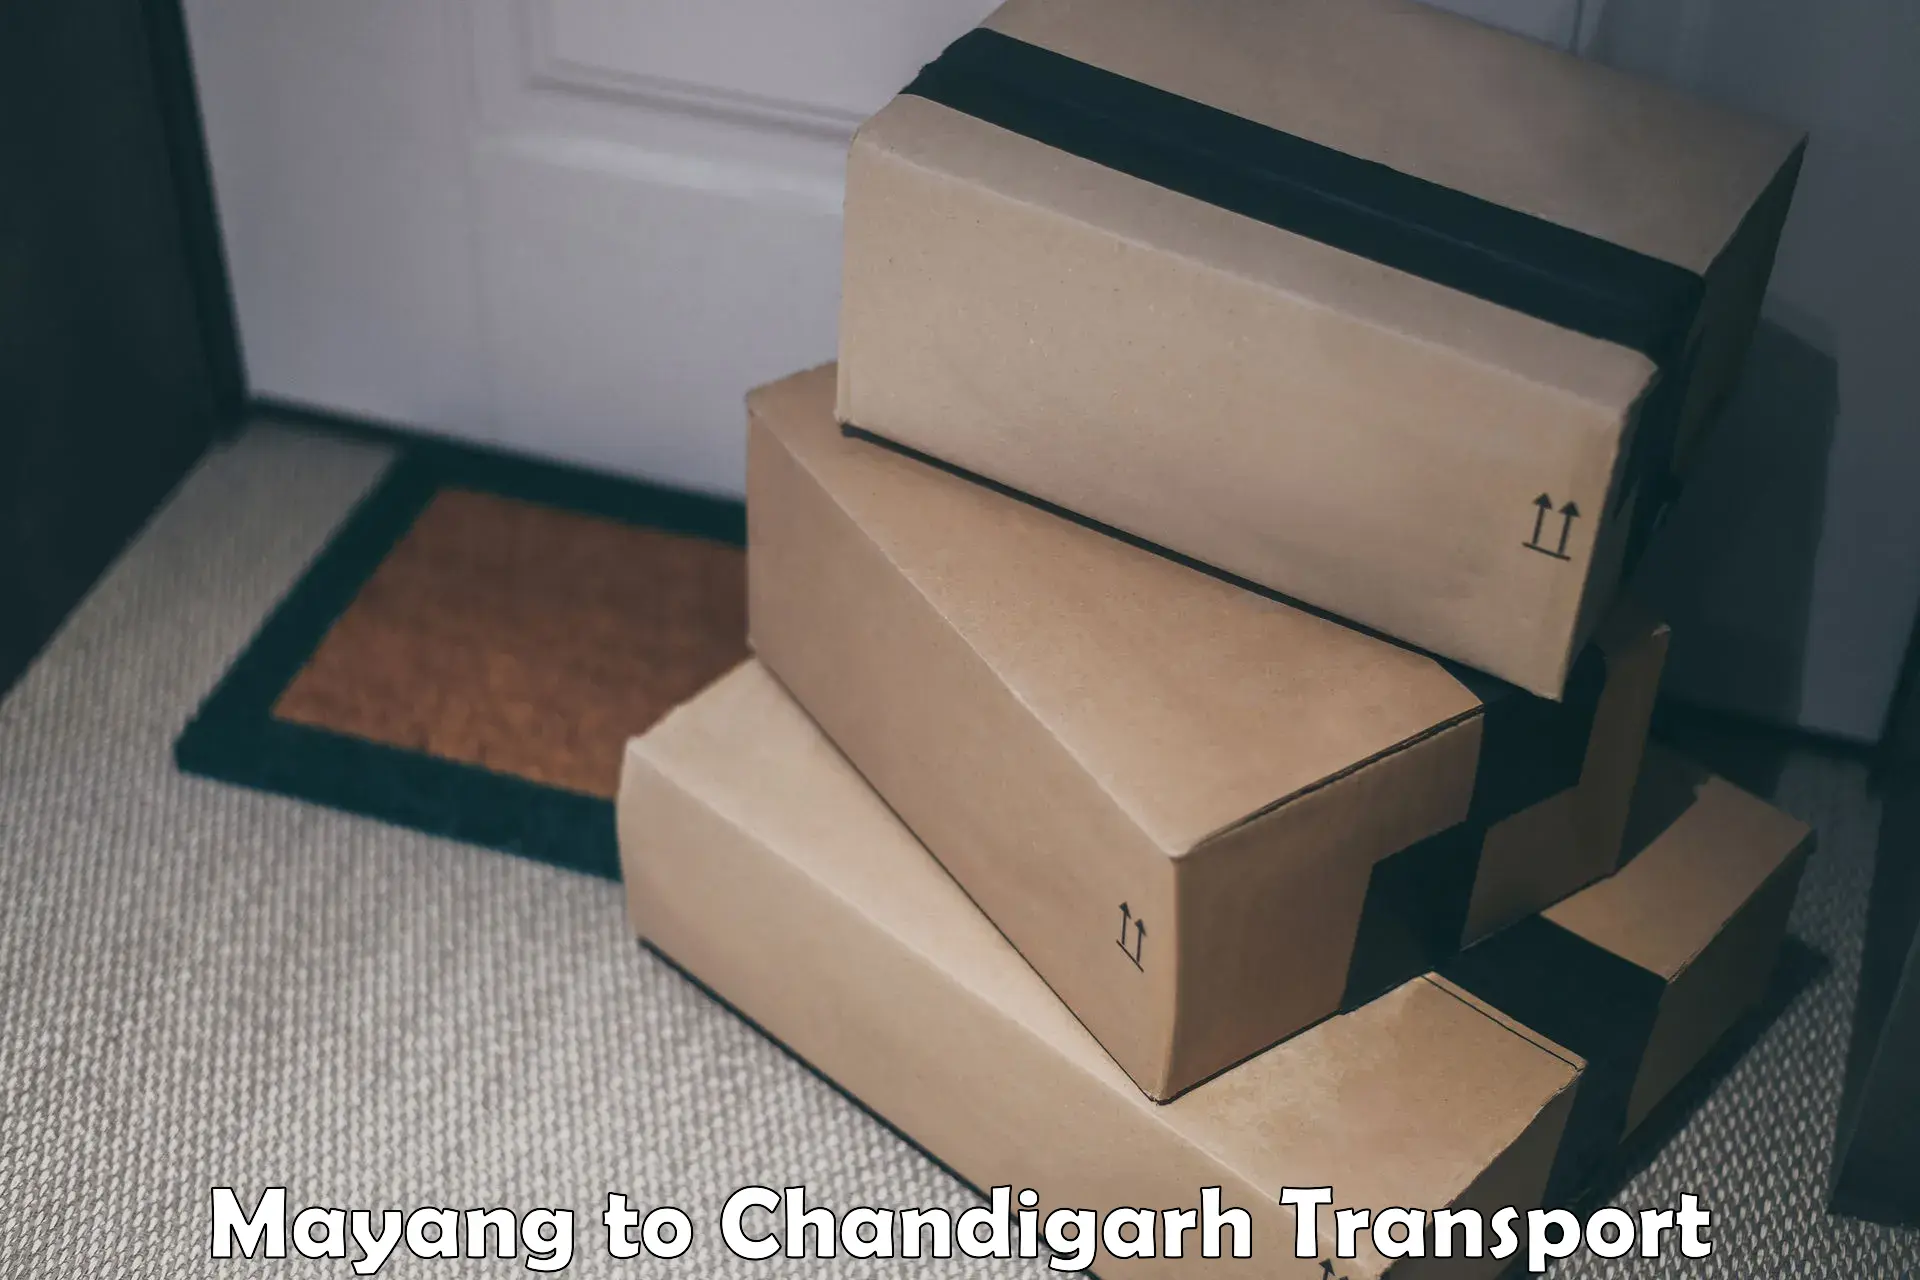 Cargo train transport services Mayang to Chandigarh